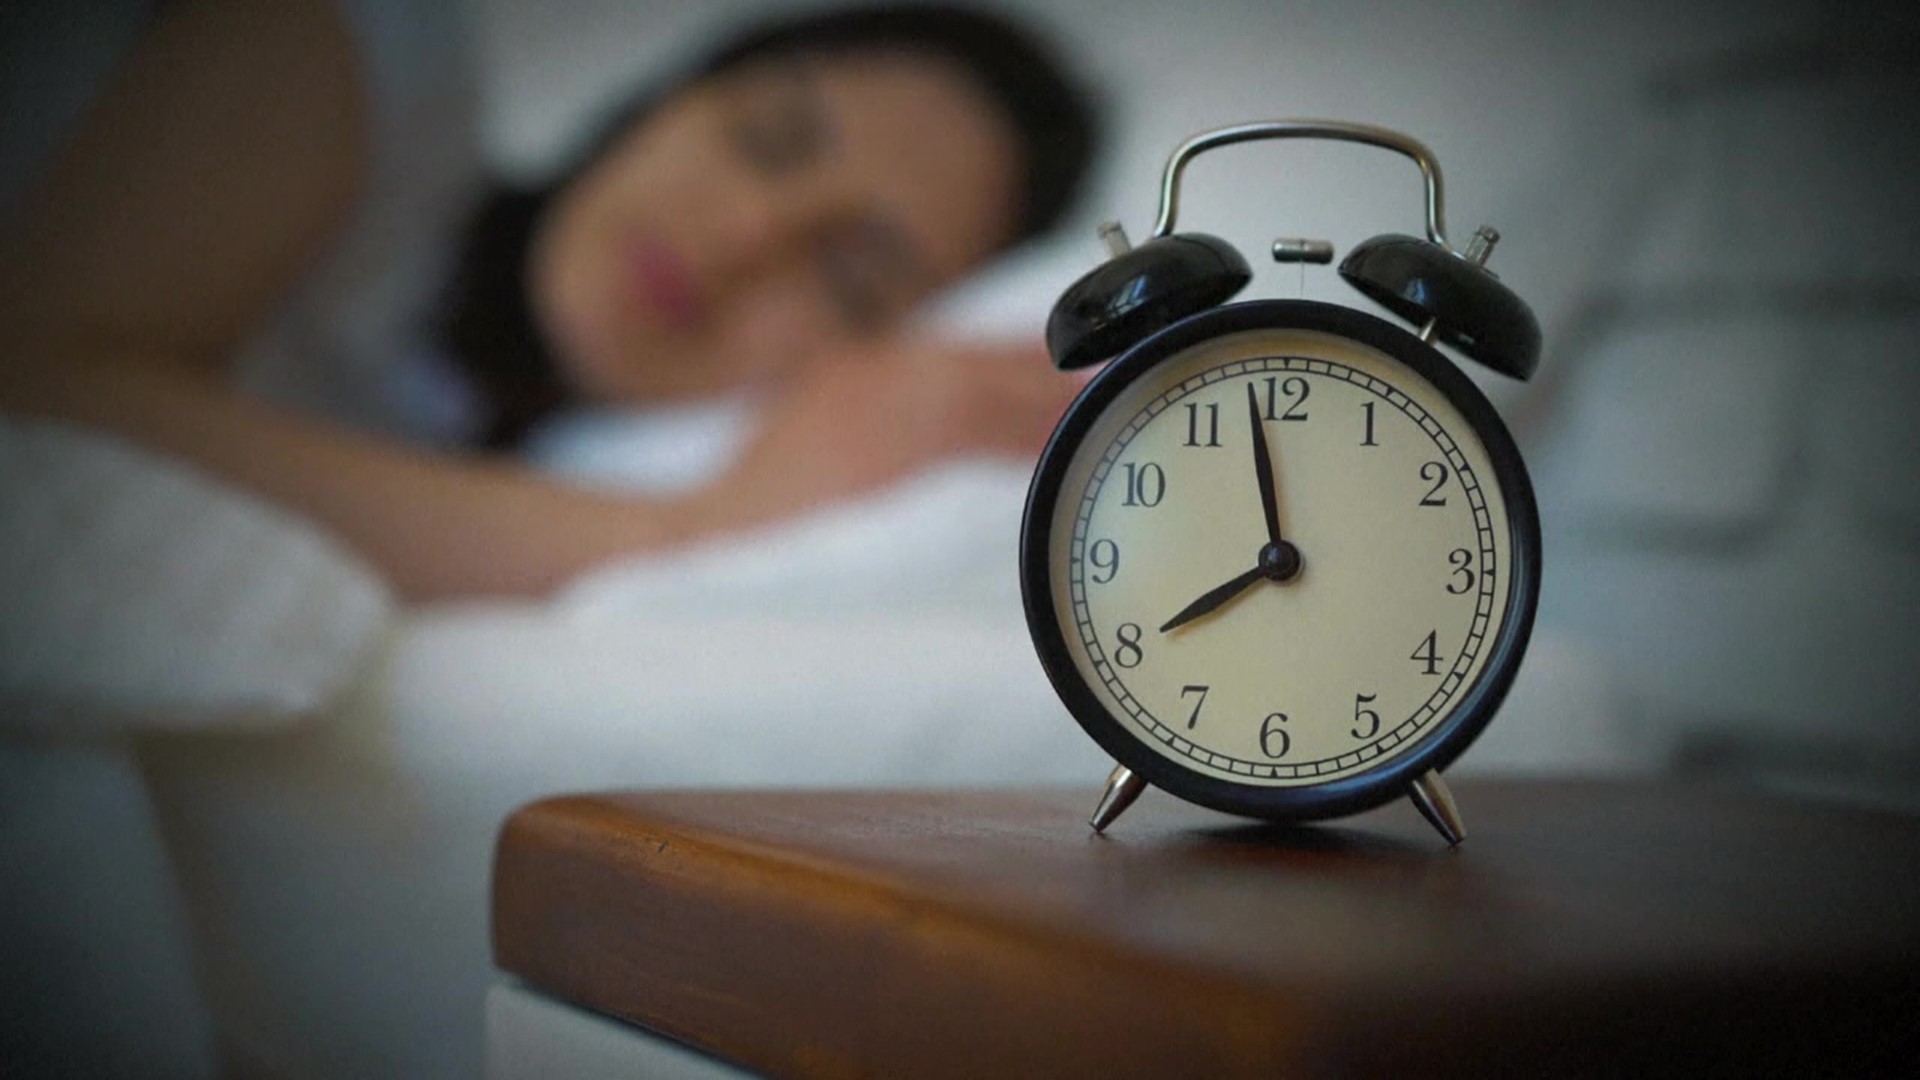 Lawmakers are pushing for Daylight Saving Time to be permanent, but some Geisinger doctors say there are health concerns that come along with that.